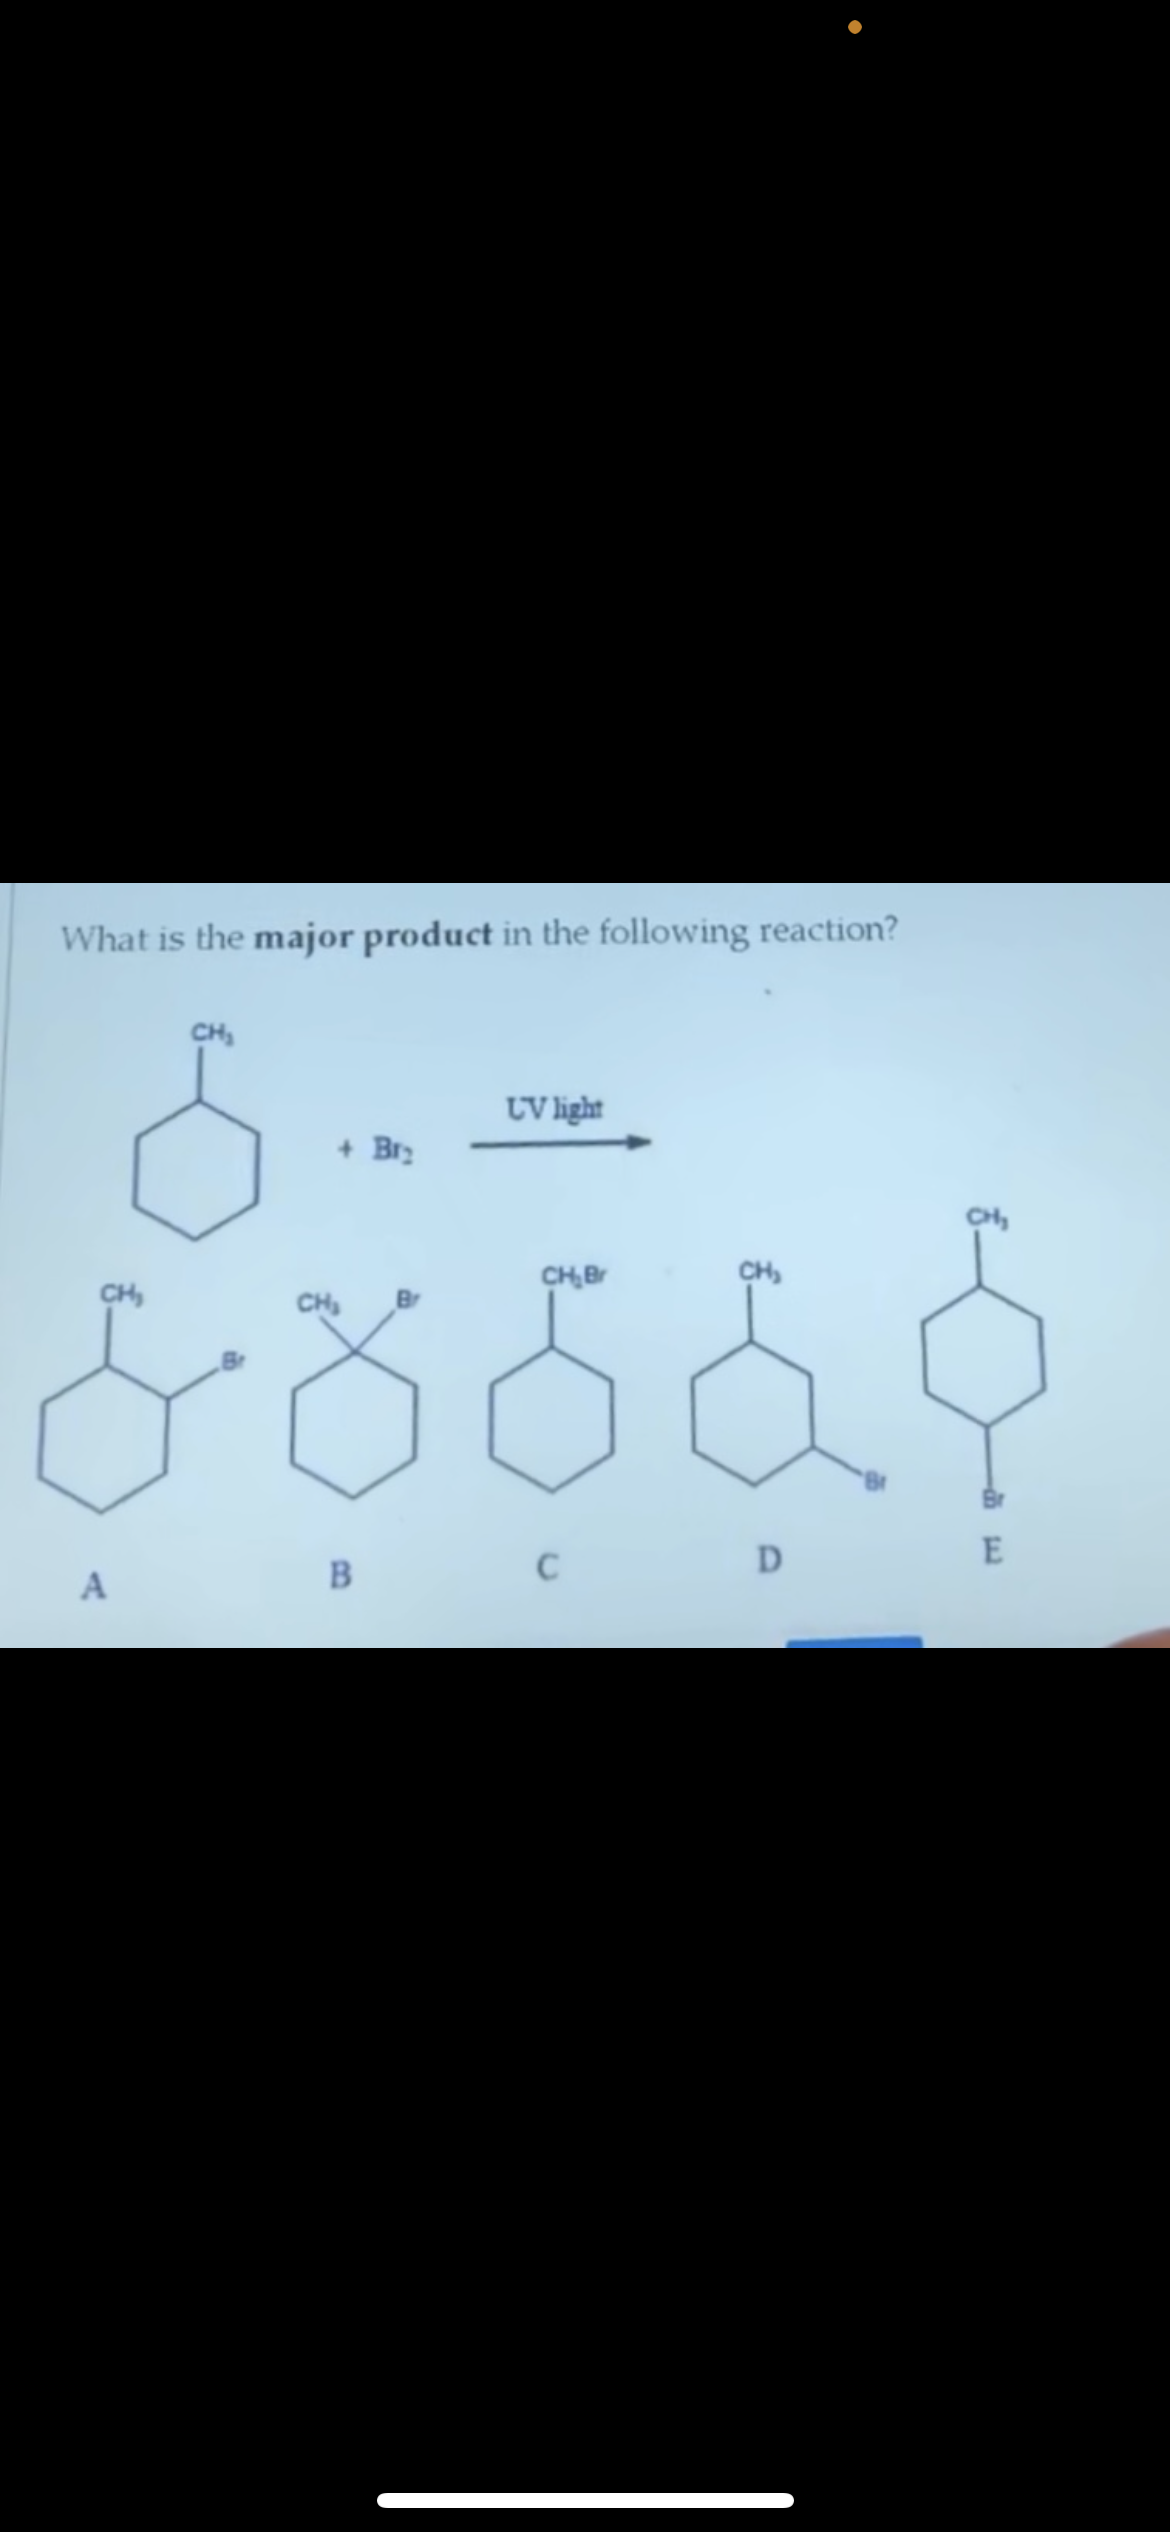 What is the major product in the following reaction?
CH₂
6
A
+ Br₂
UV light
CH₂
CH₂Br
CH₂
& 8 5 6 8
D
E
C
B